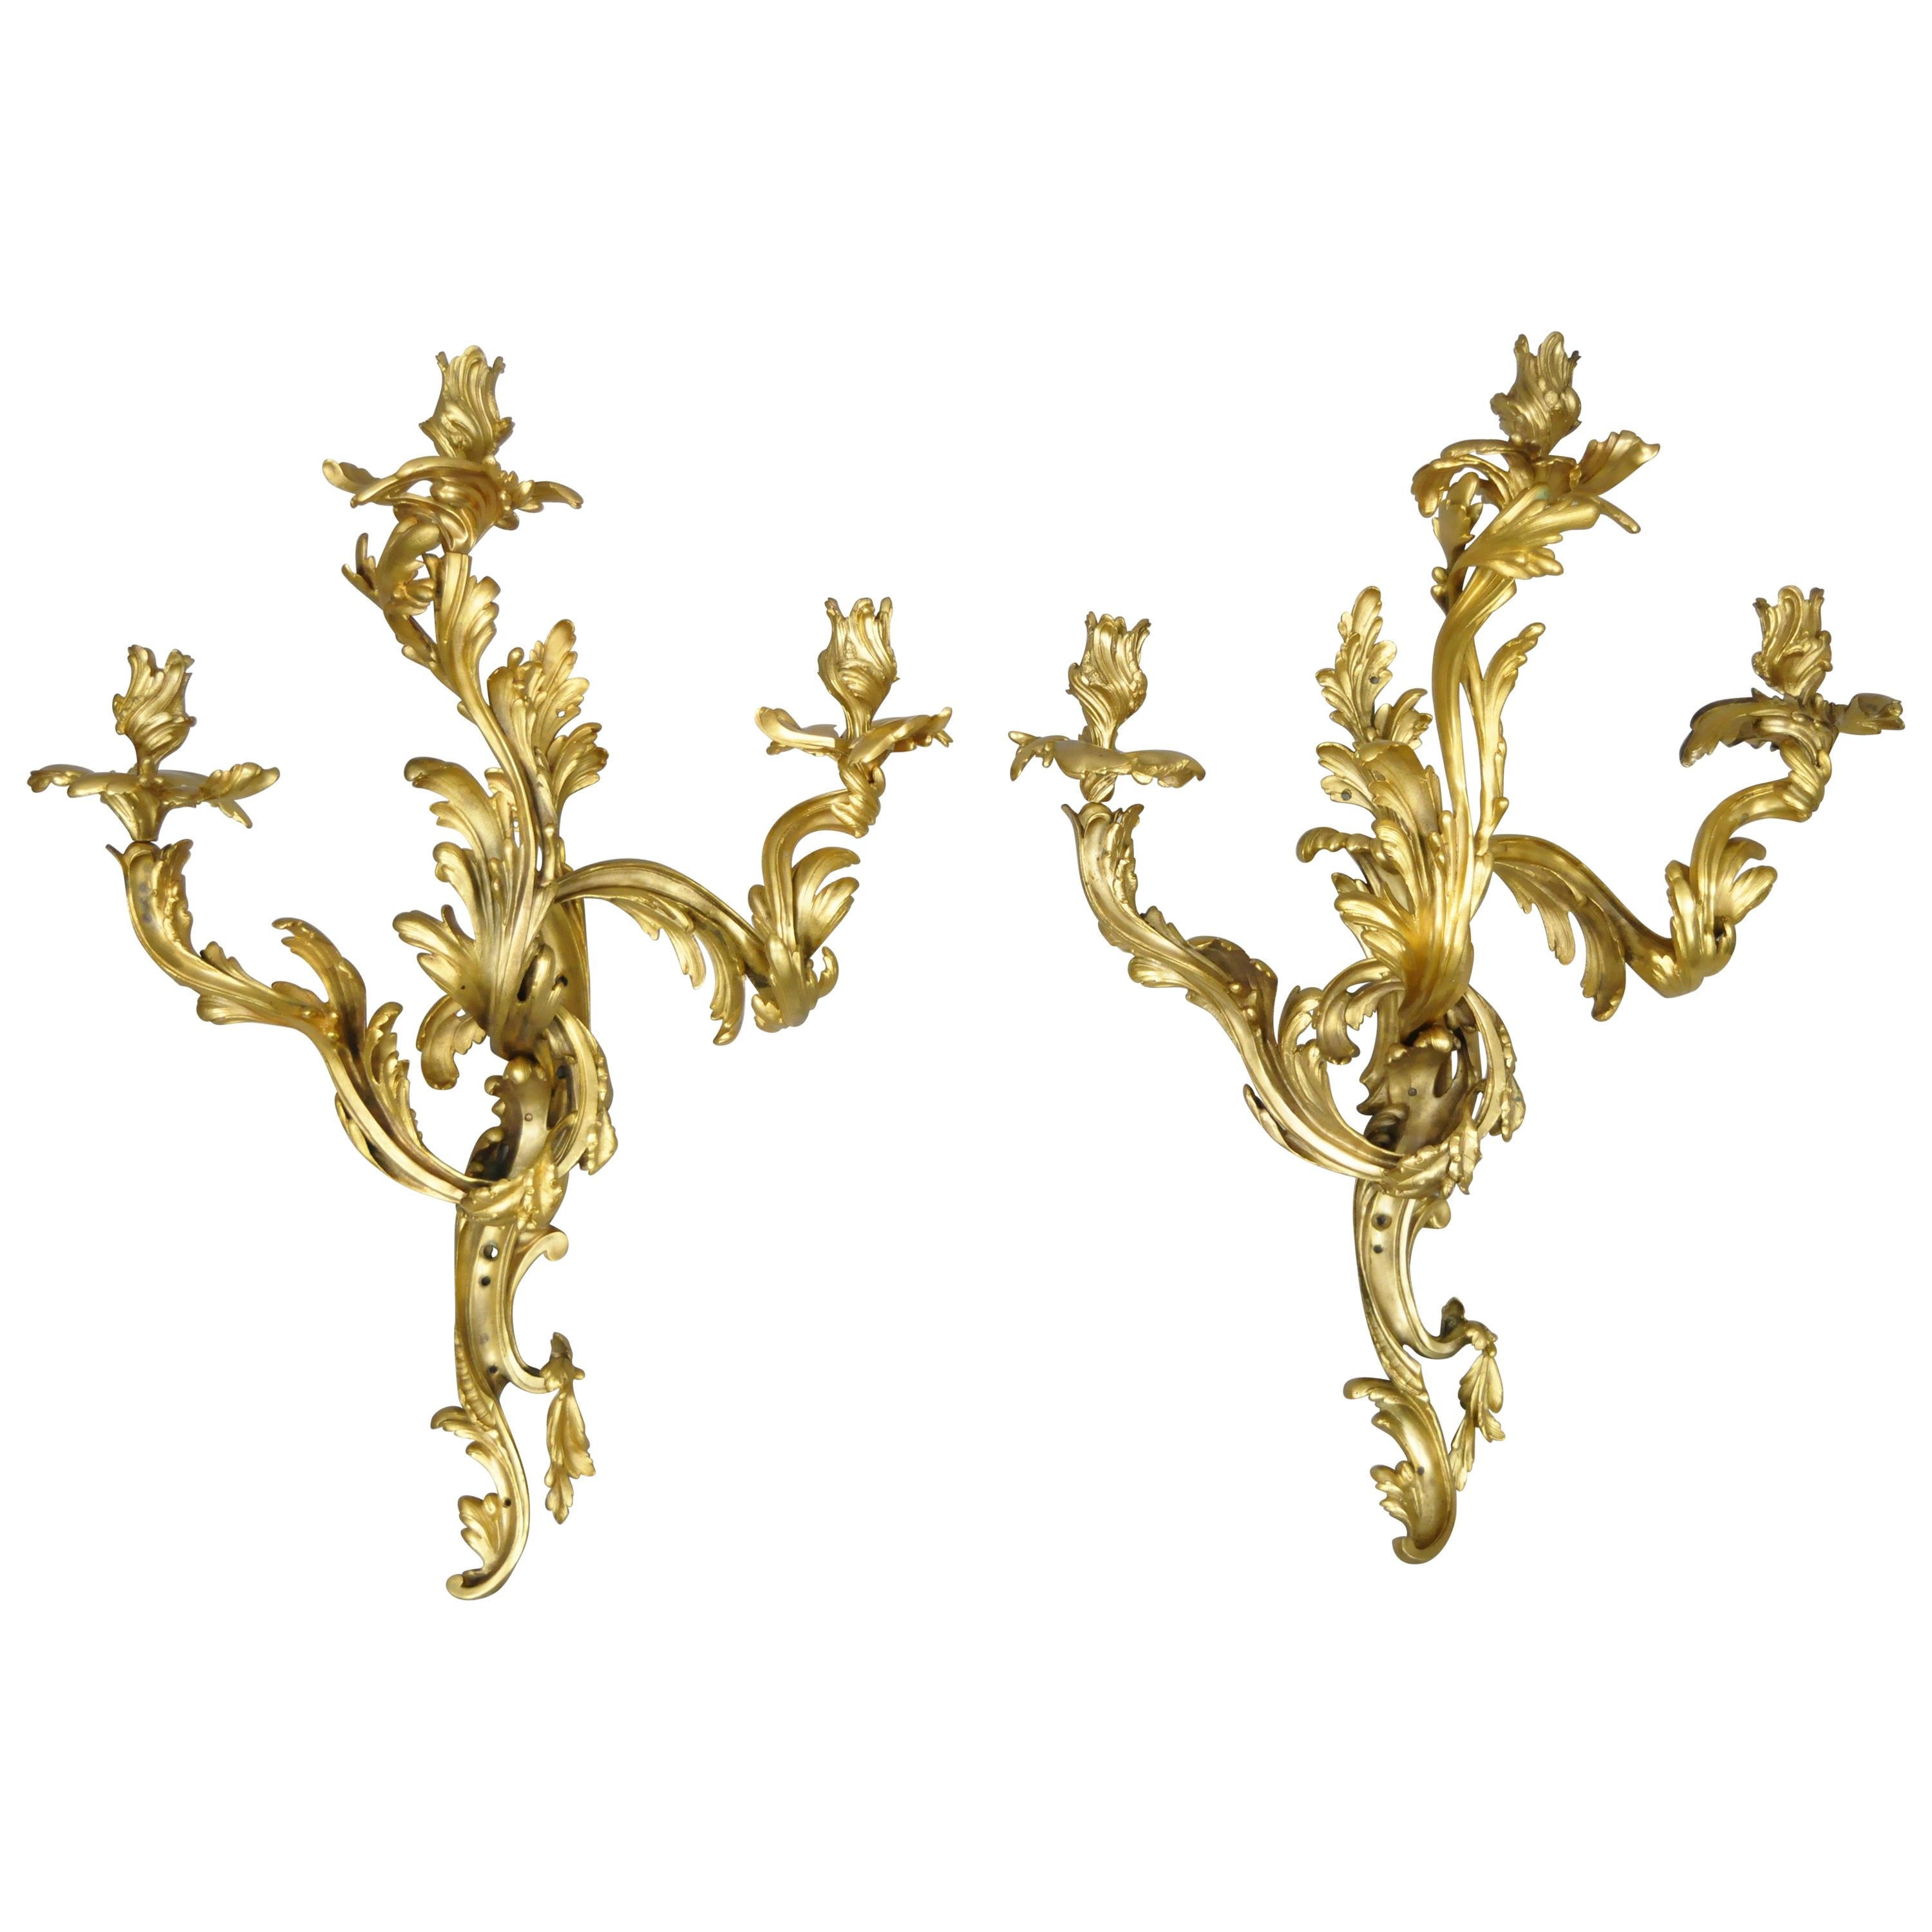 Large Pair of Antique French Rococo Gold Gilt Dore Bronze Candle Wall Sconces